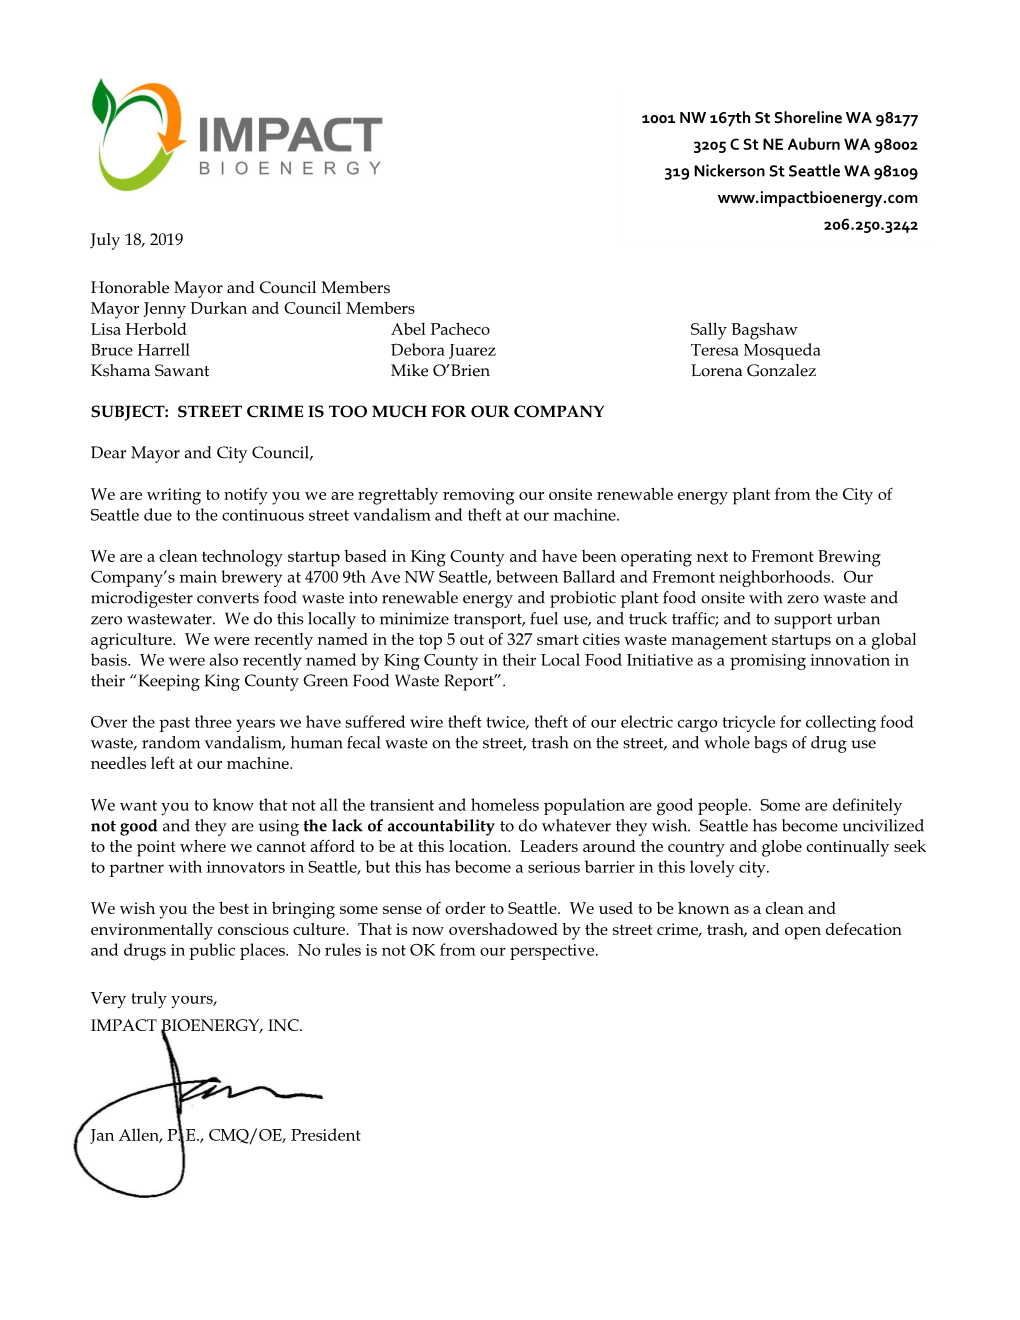 Letter to Mayor and City Council July 18 2019[1]